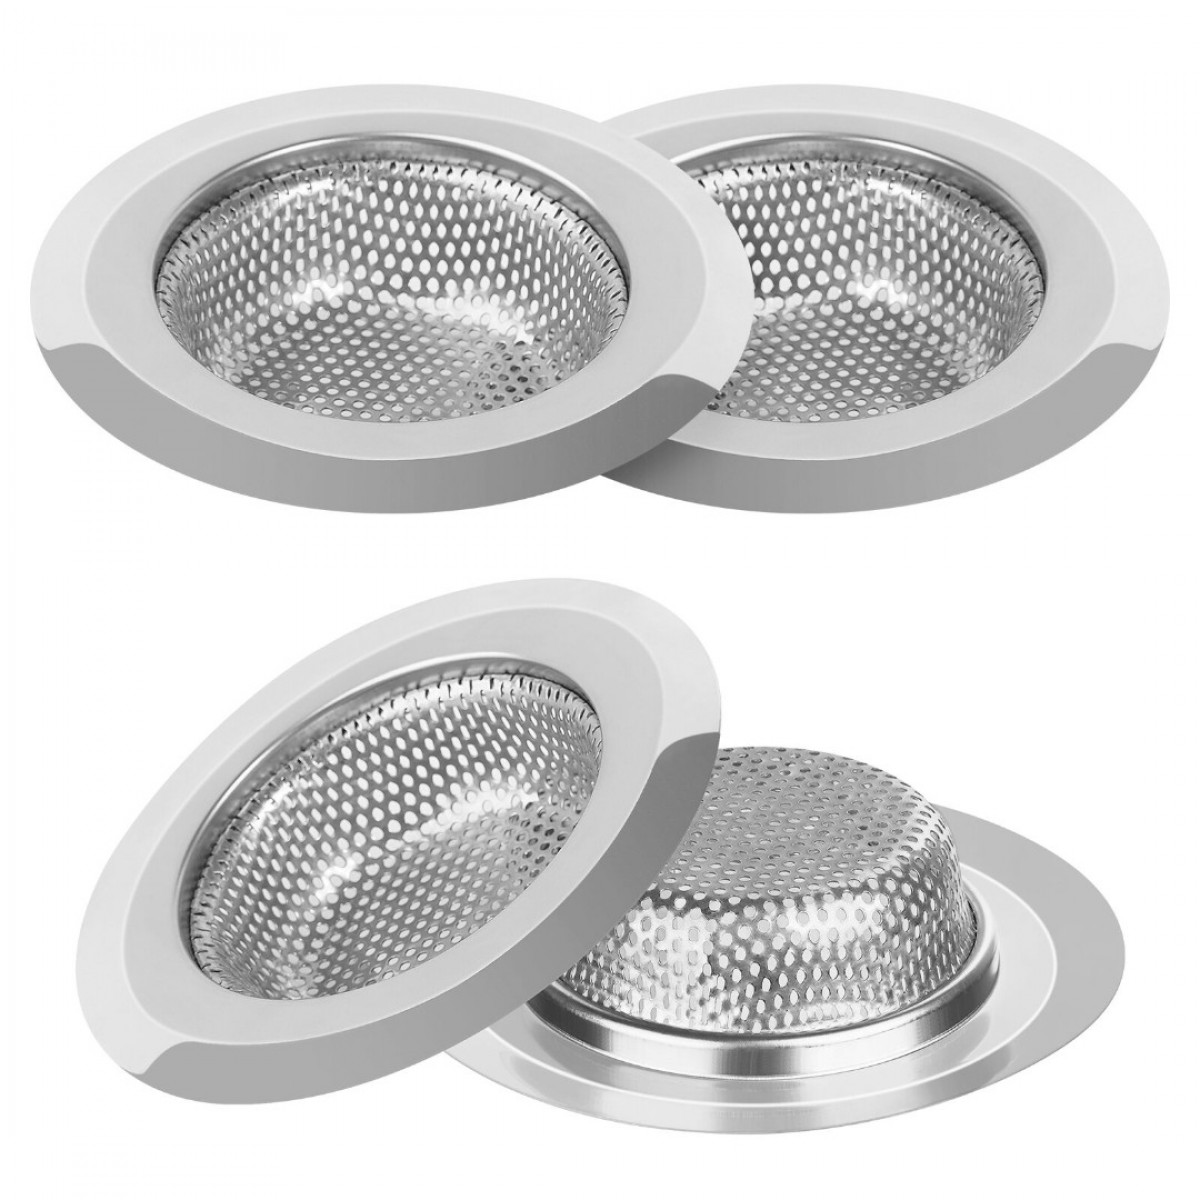 Ohtomber 4 Pack Sink Strainer - Stainless Steel Kitchen Sink Strainers for Kitchen Sink with Large W